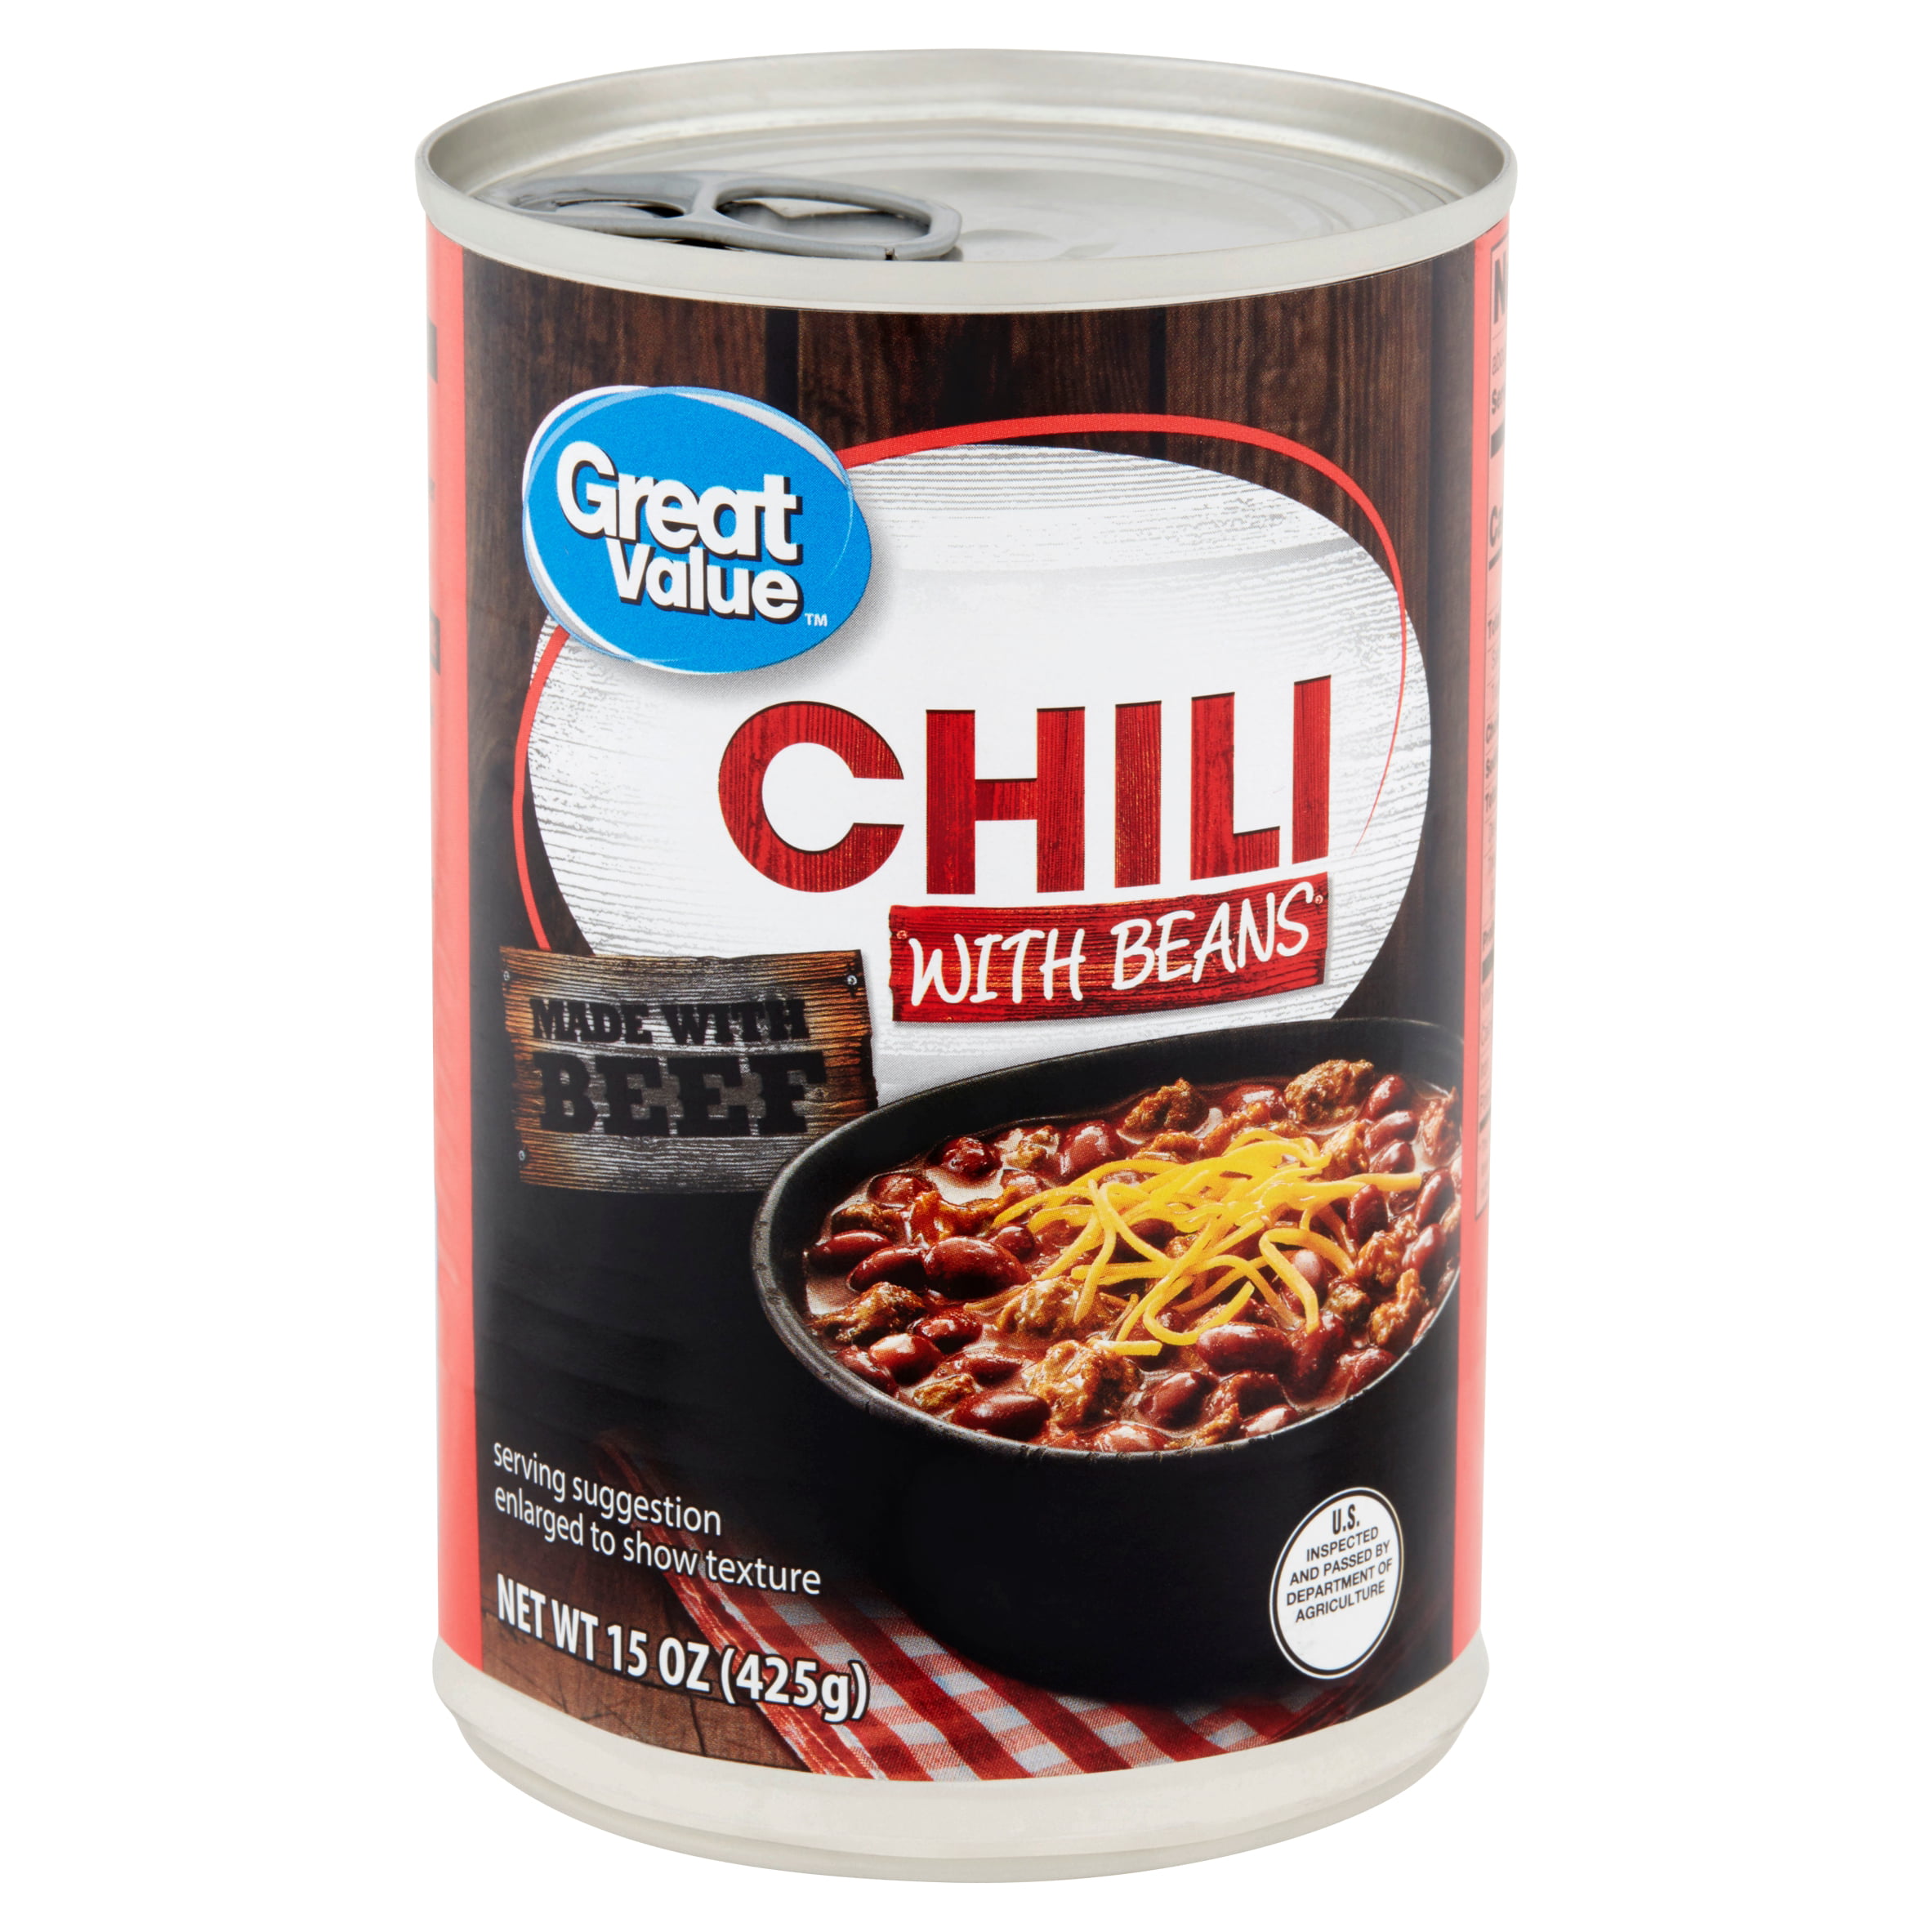 Great Value Chili Beans